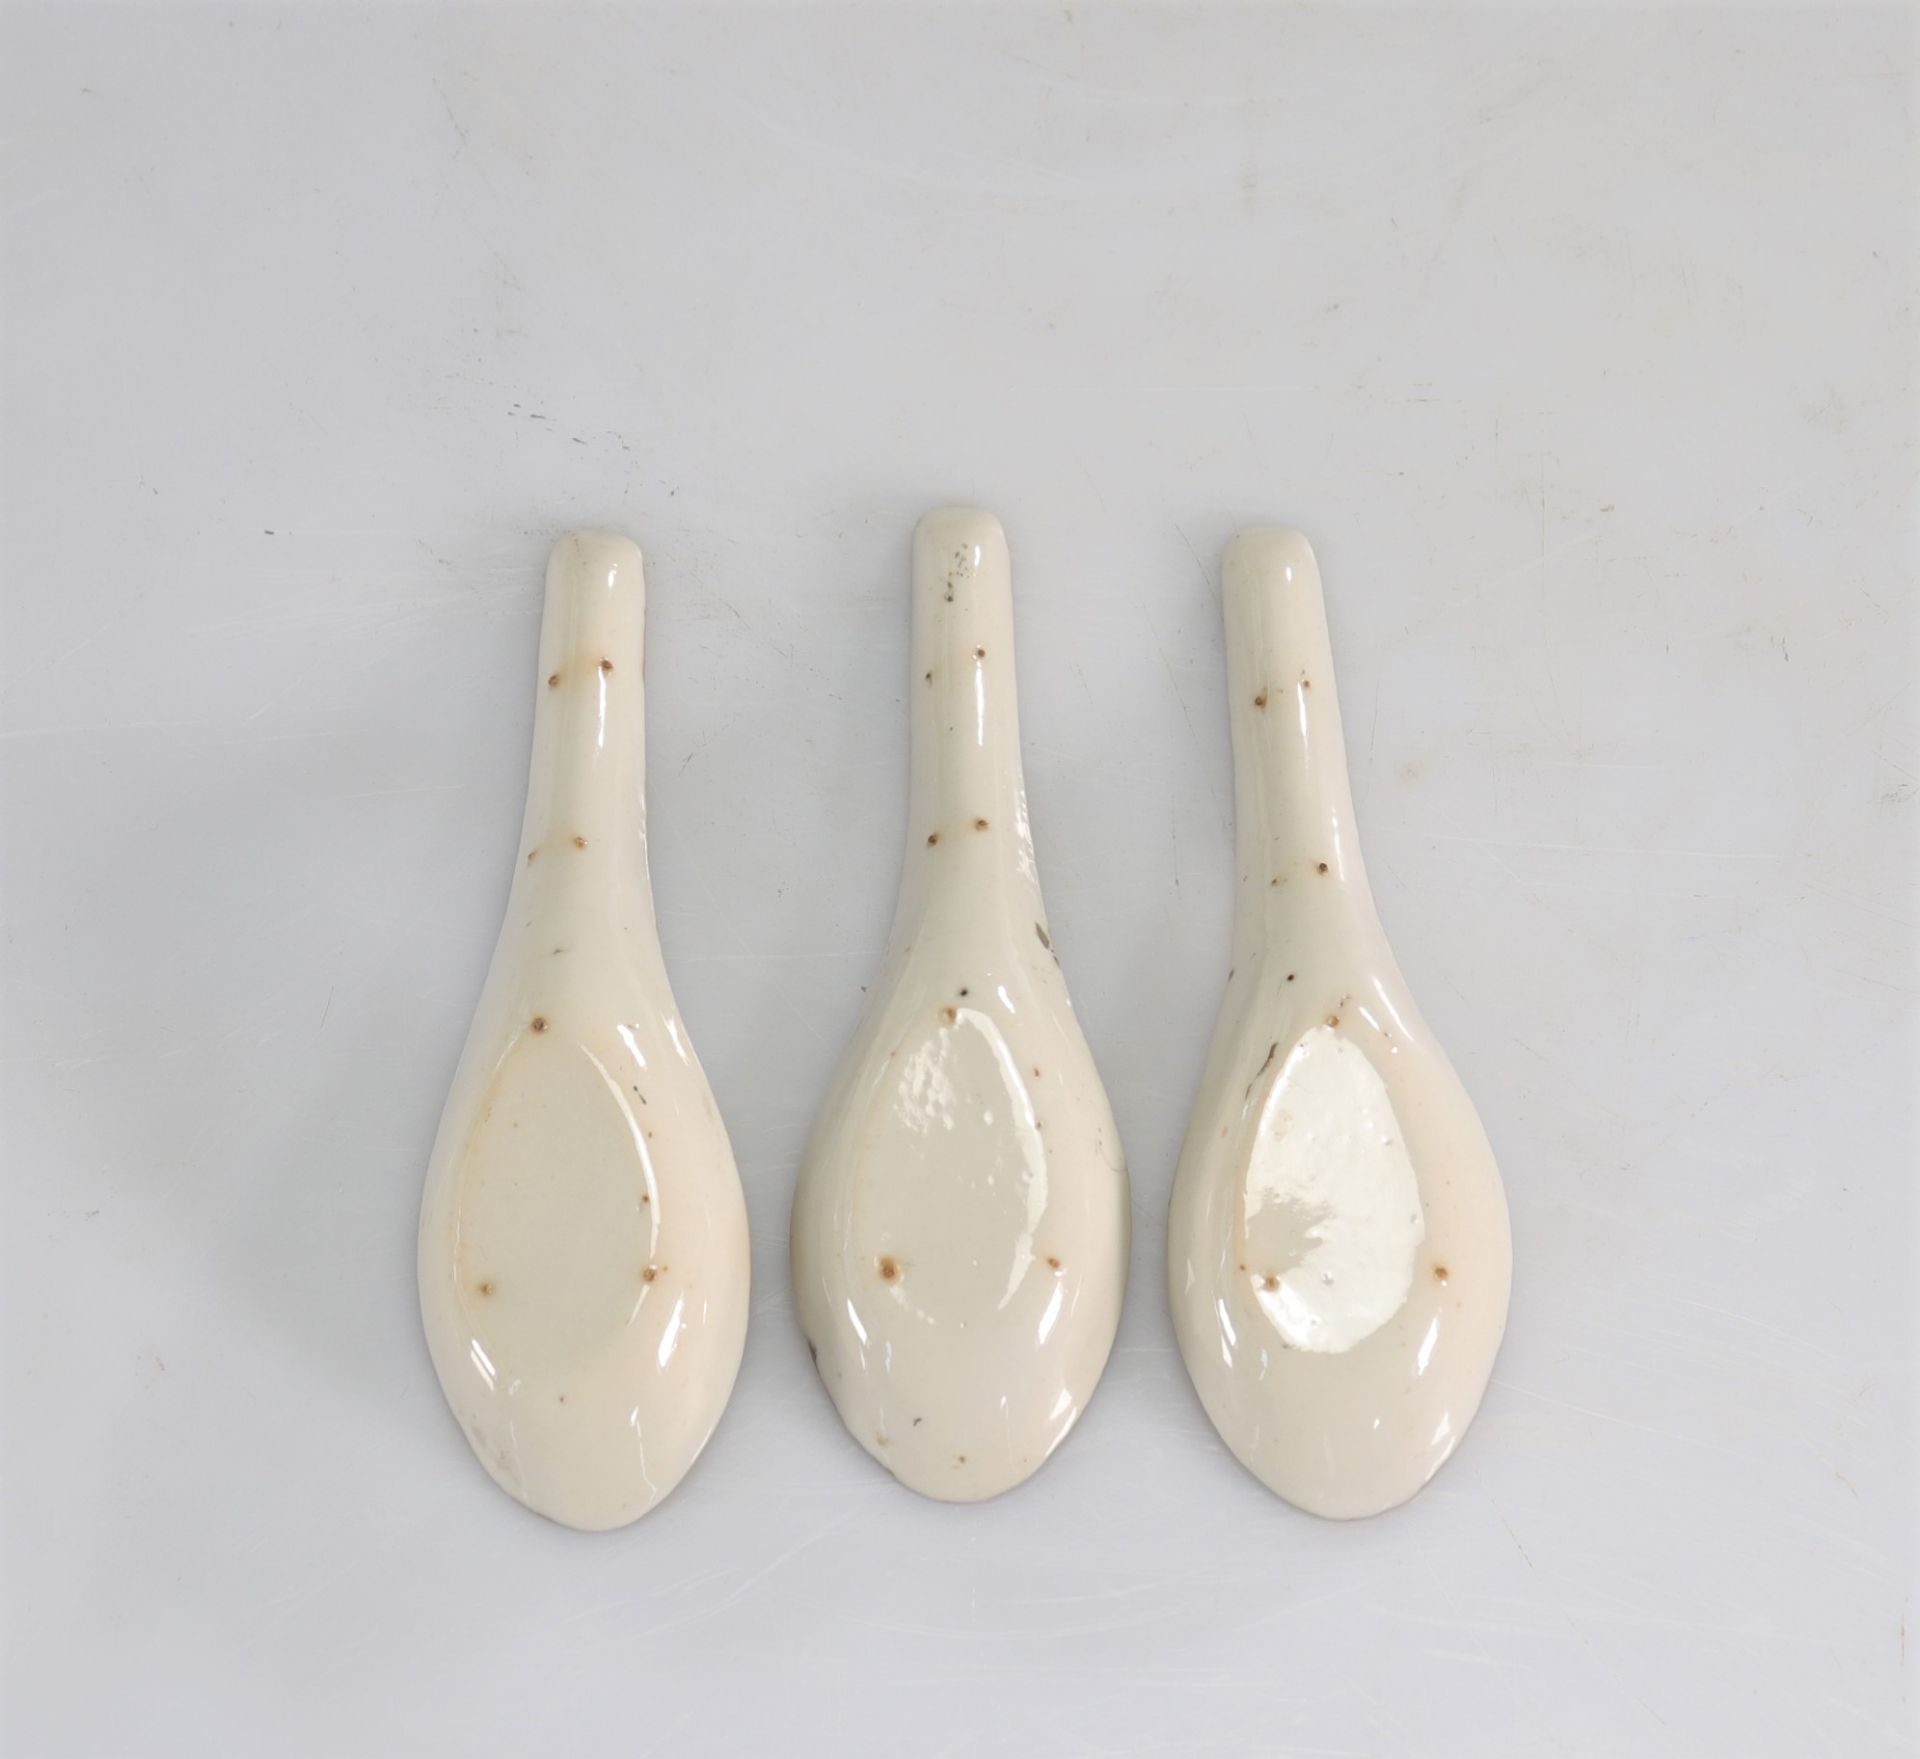 Chinese porcelain spoons (3) - Image 2 of 2